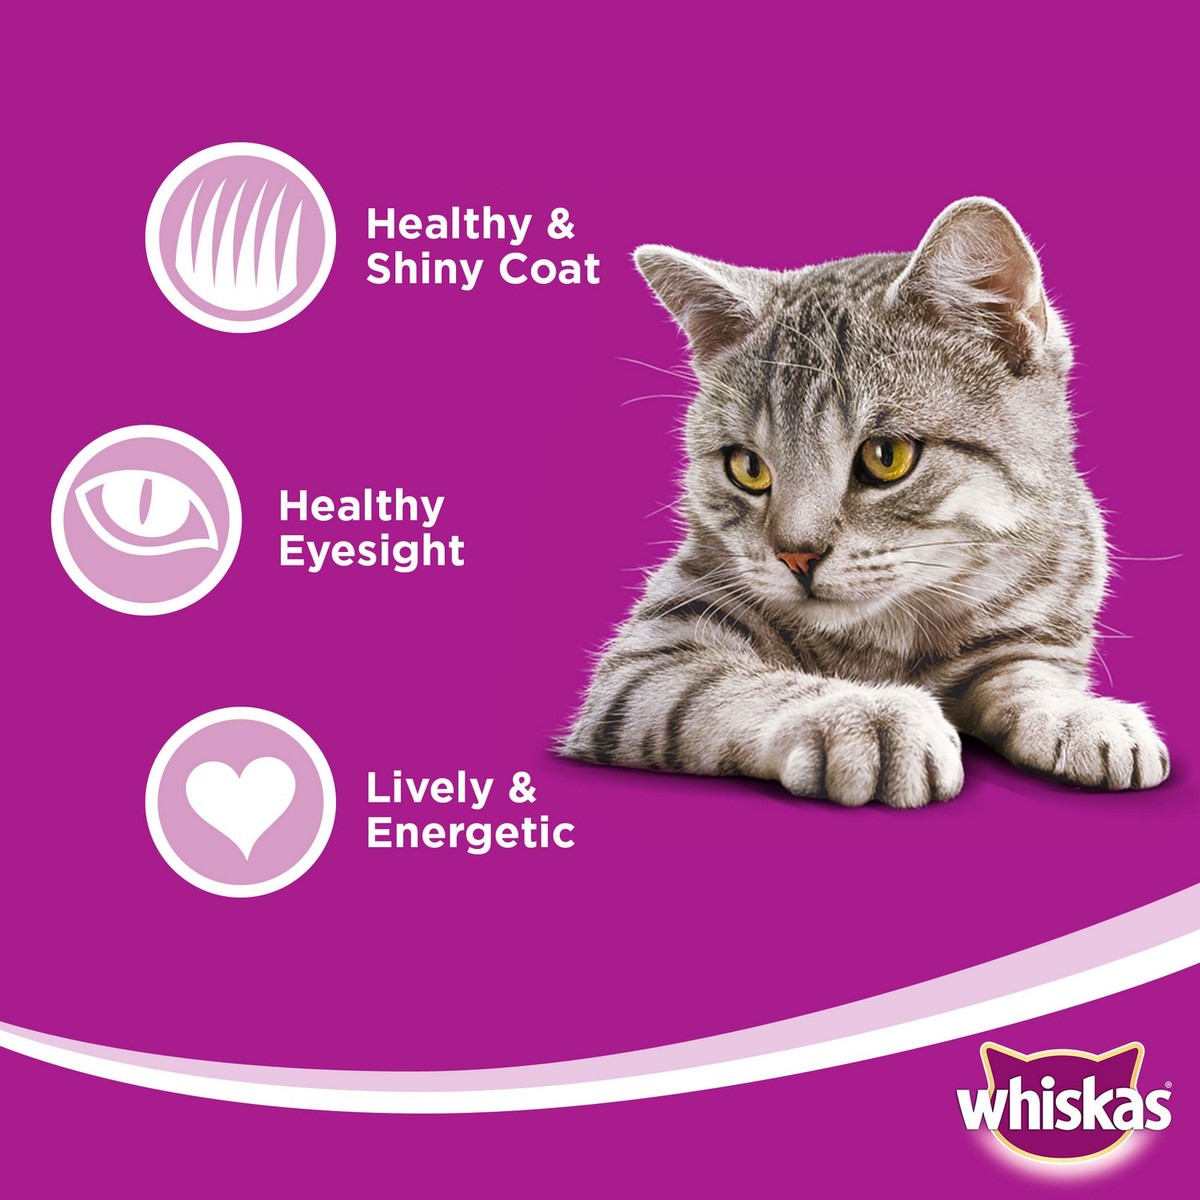 Whiskas Temptations with Chicken and Cheese Cat Treats 60g